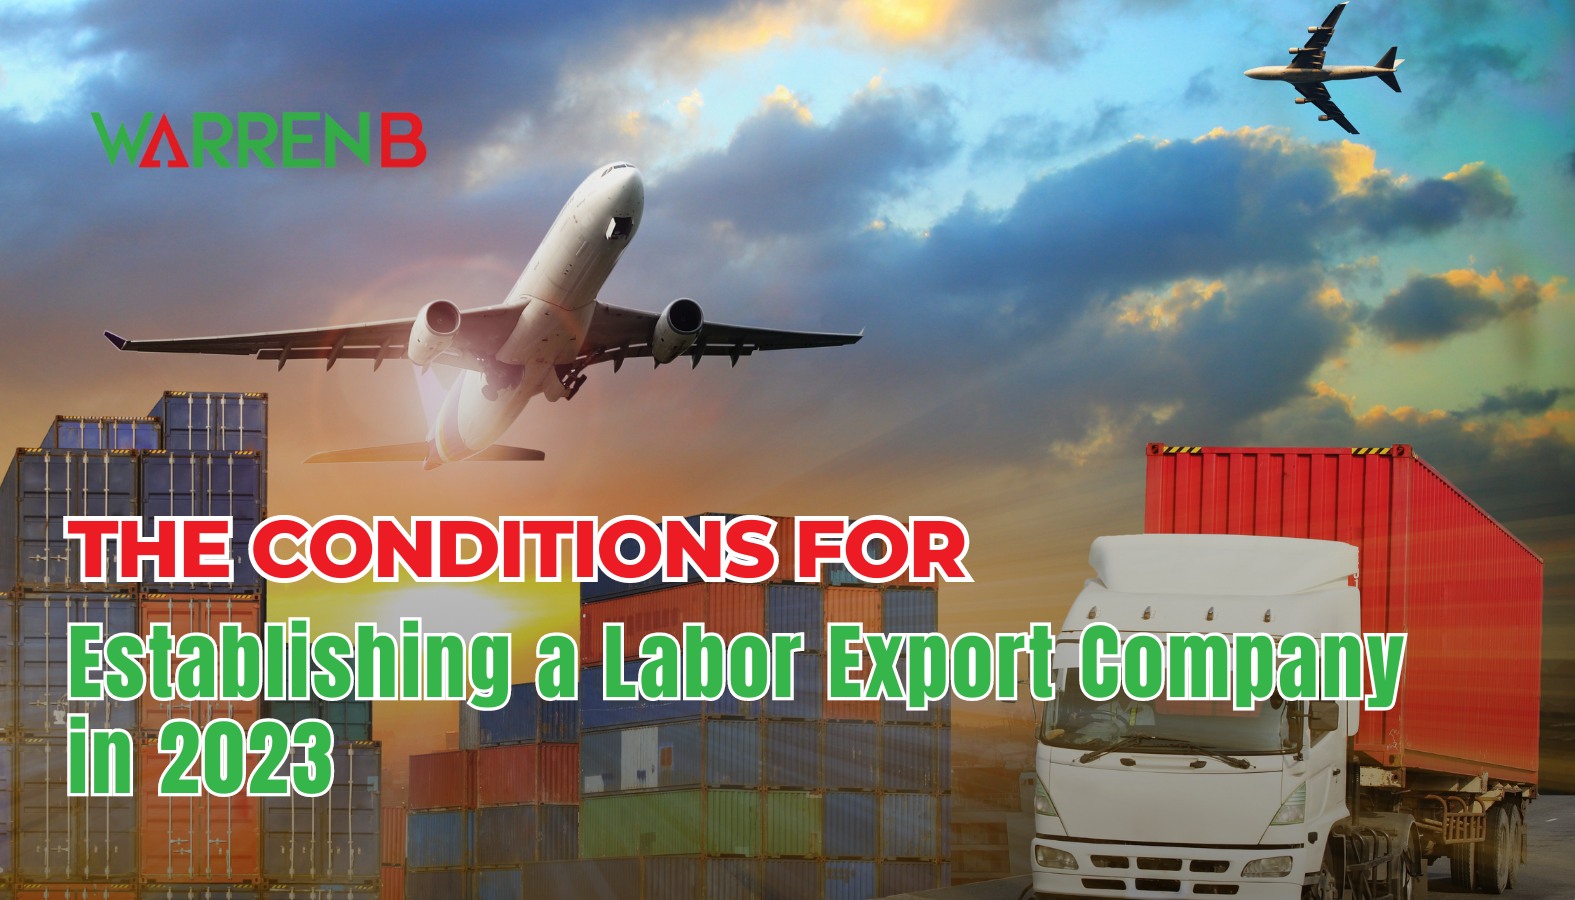 The conditions for establishing a labor export company